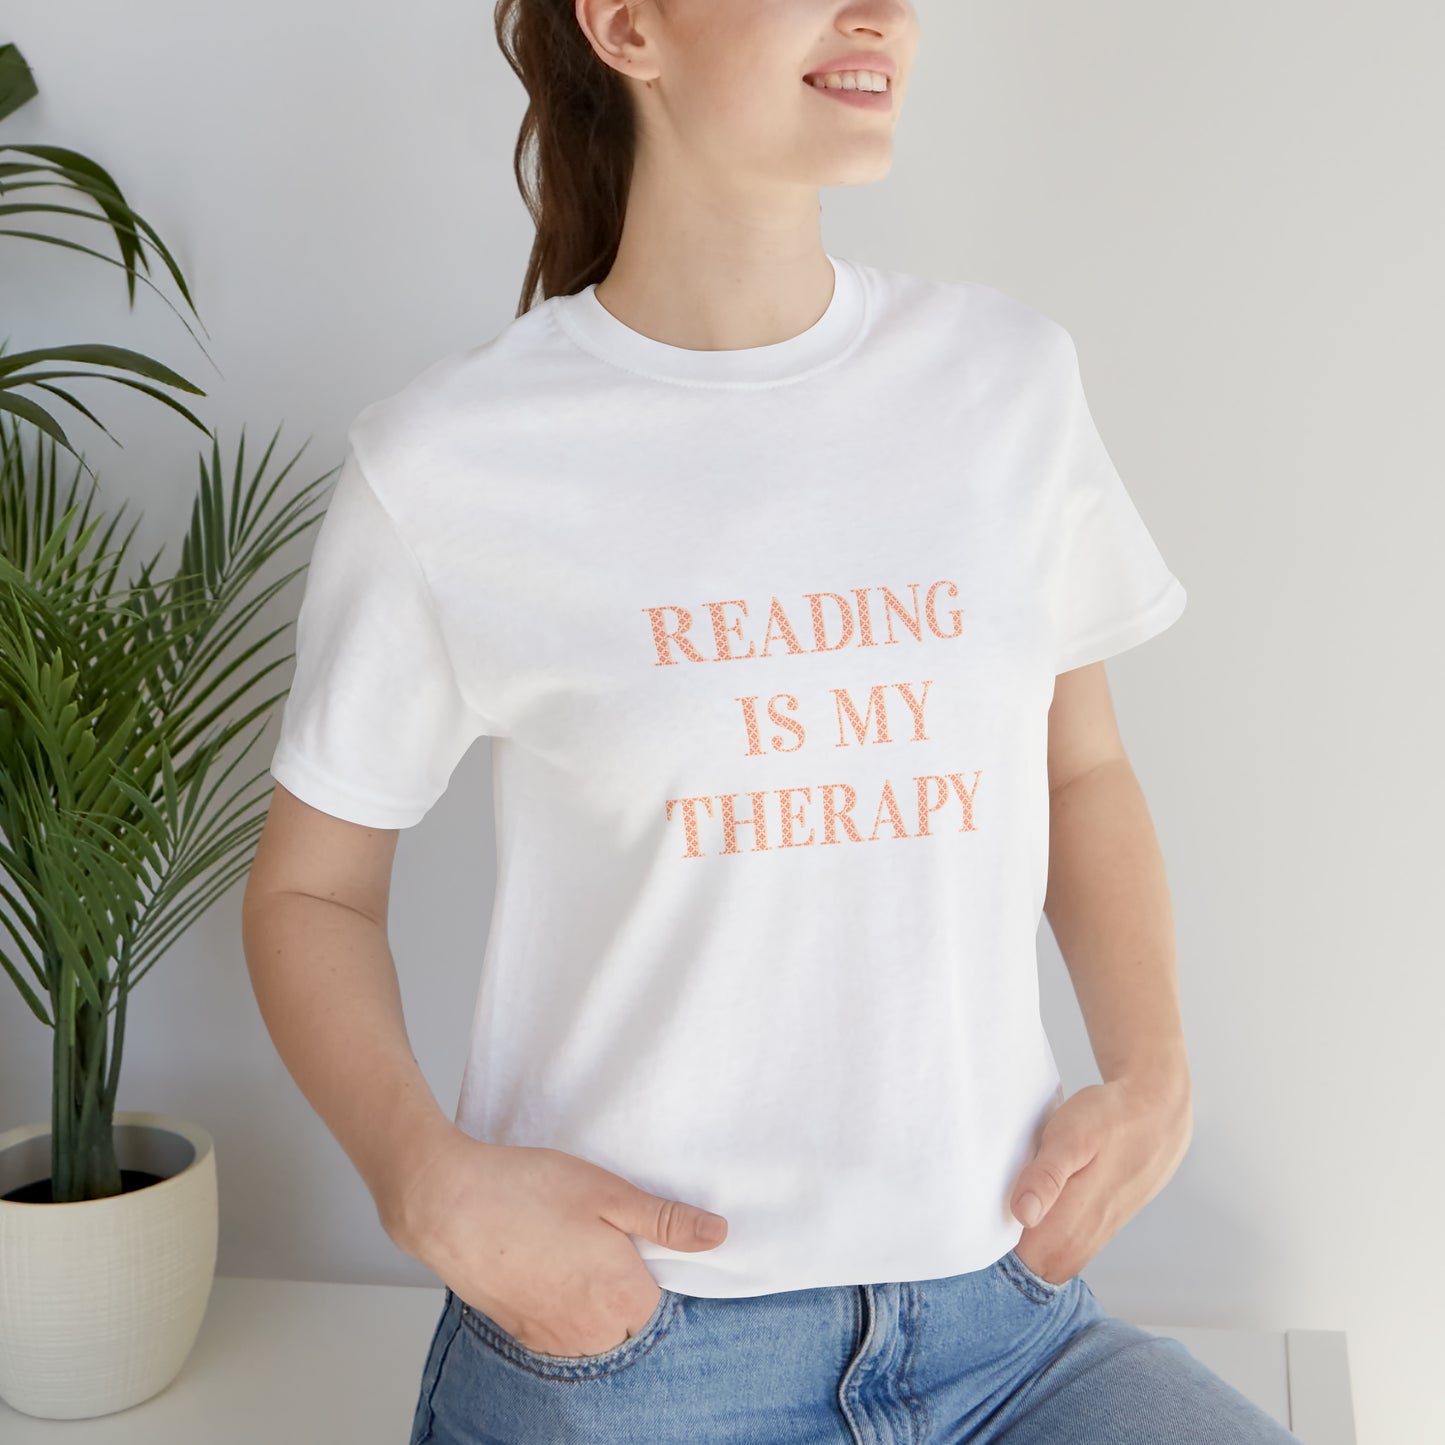 Hobby, Reading Is My Therapy, Words, Books- Adult, Regular Fit, Soft Cotton, Smaller Size Image T-Shirt